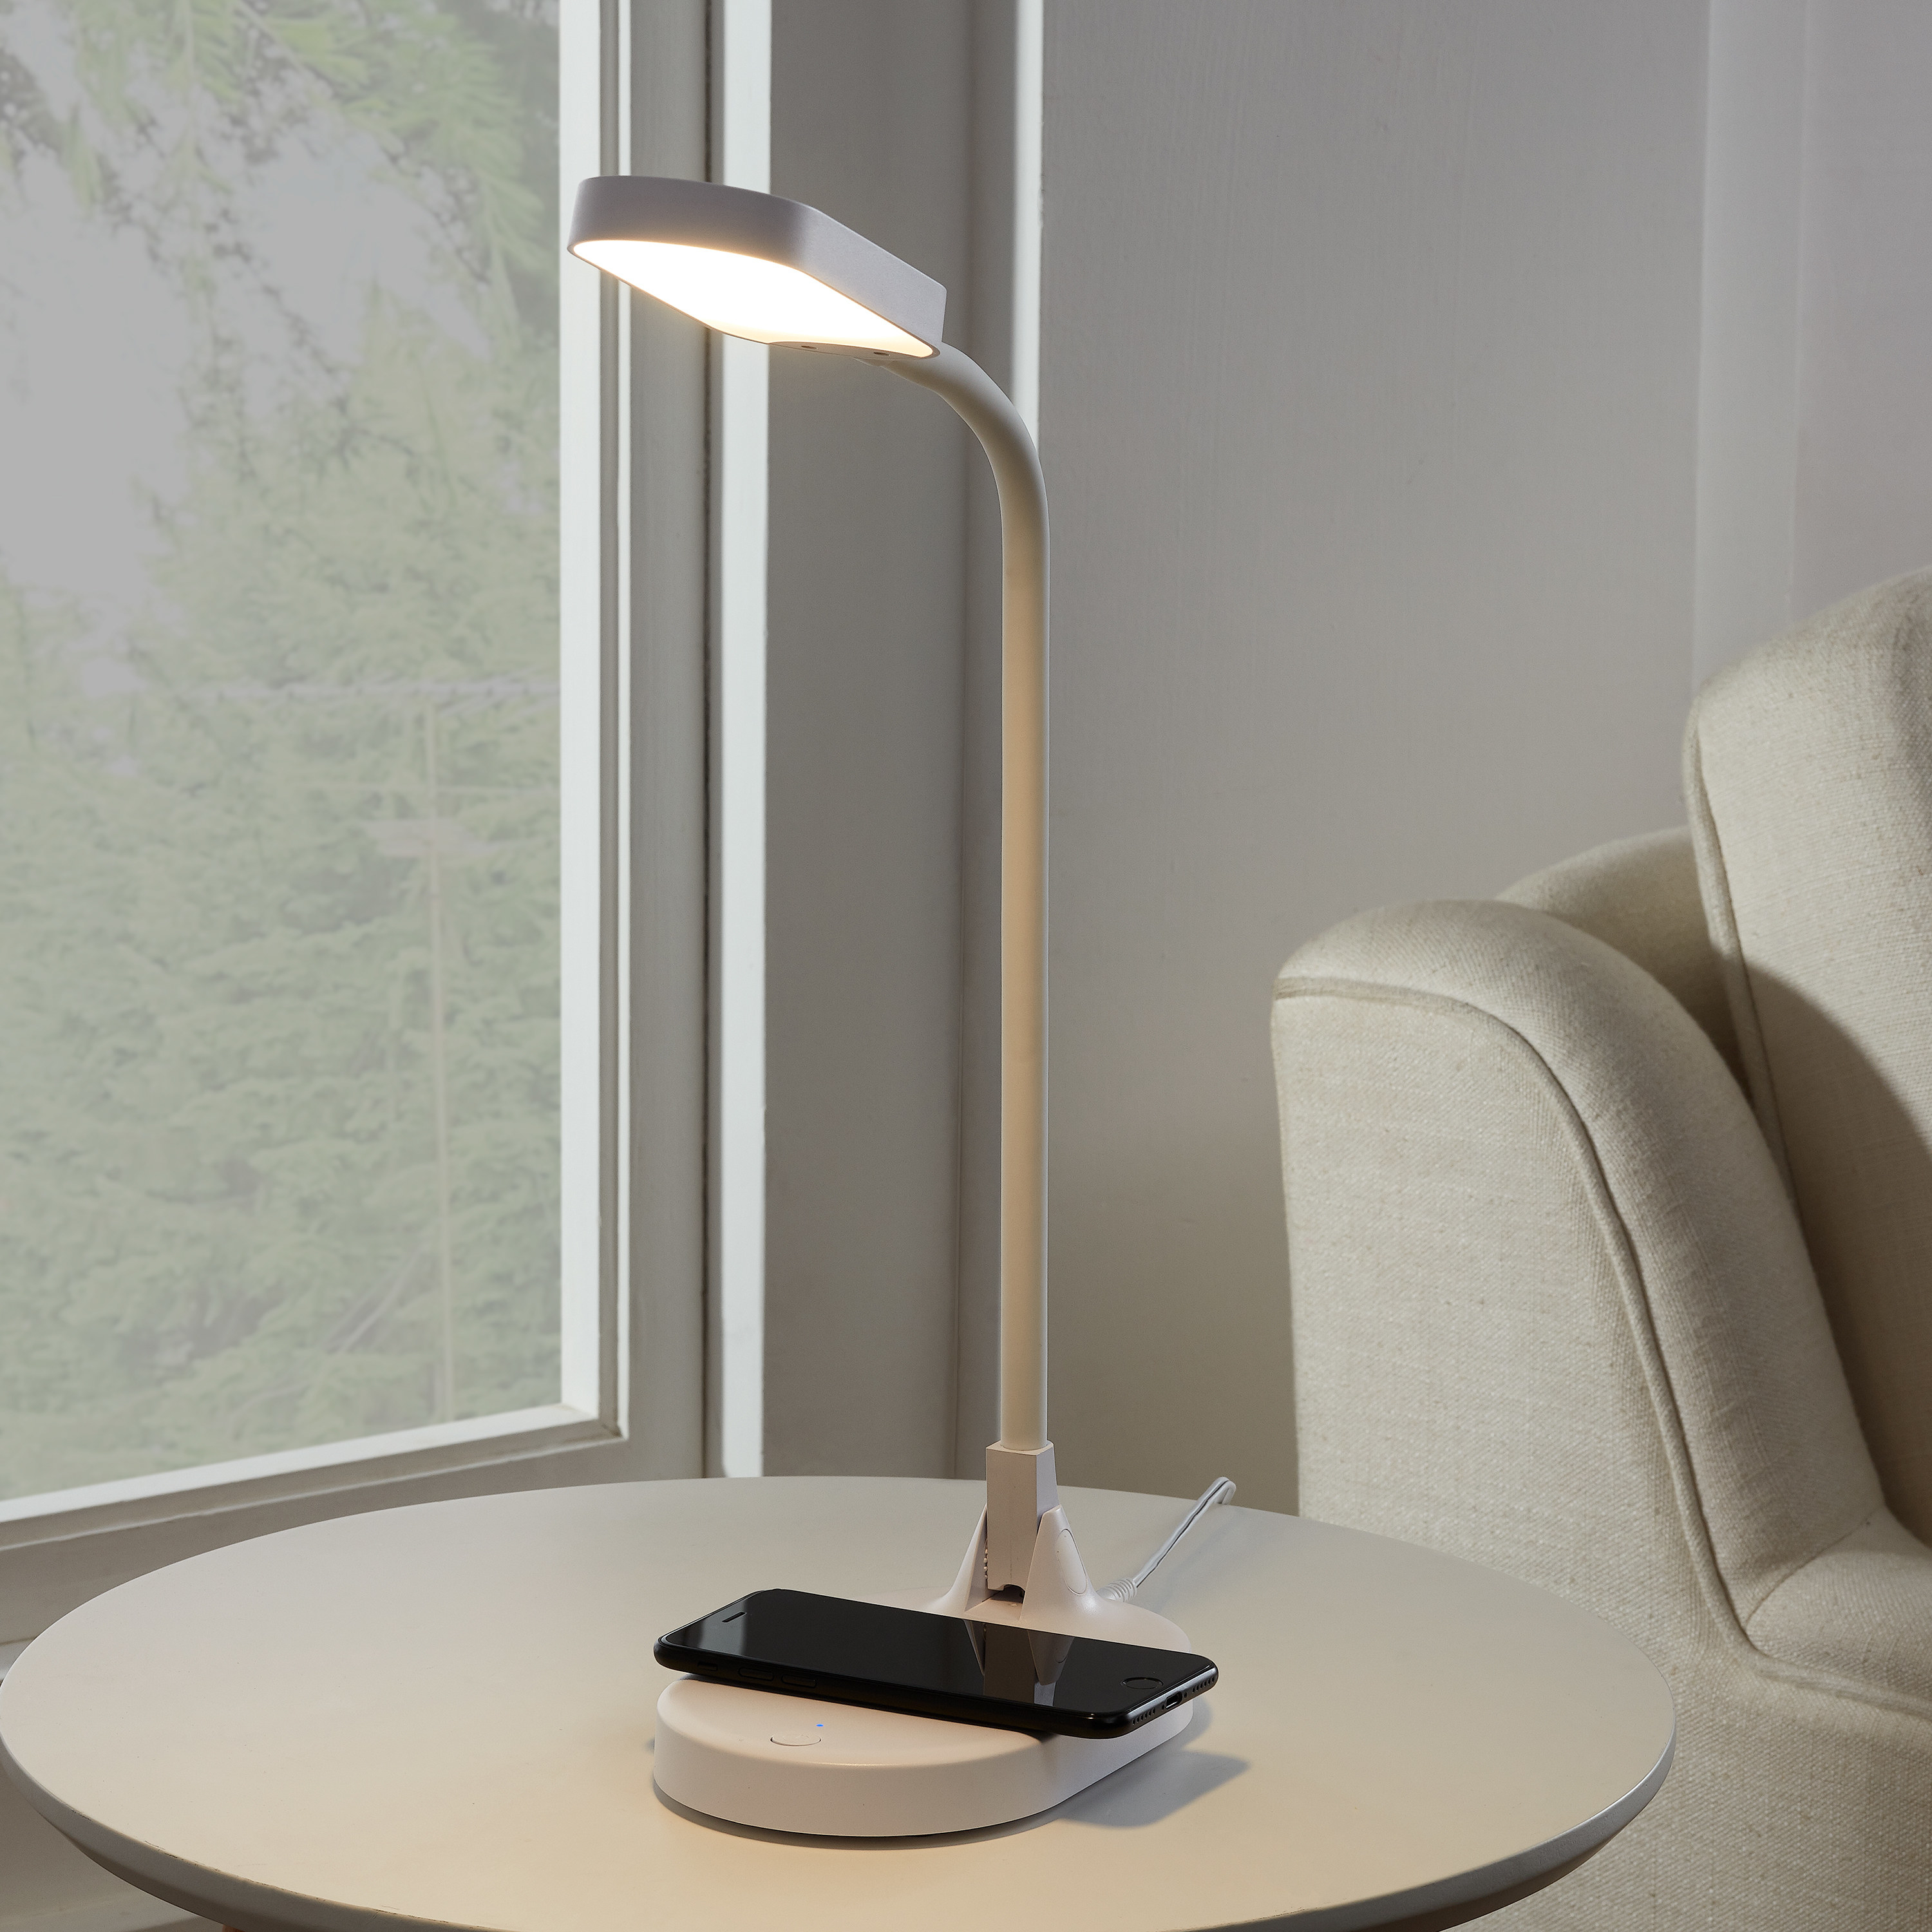 simple lamp with a charging base for a phone